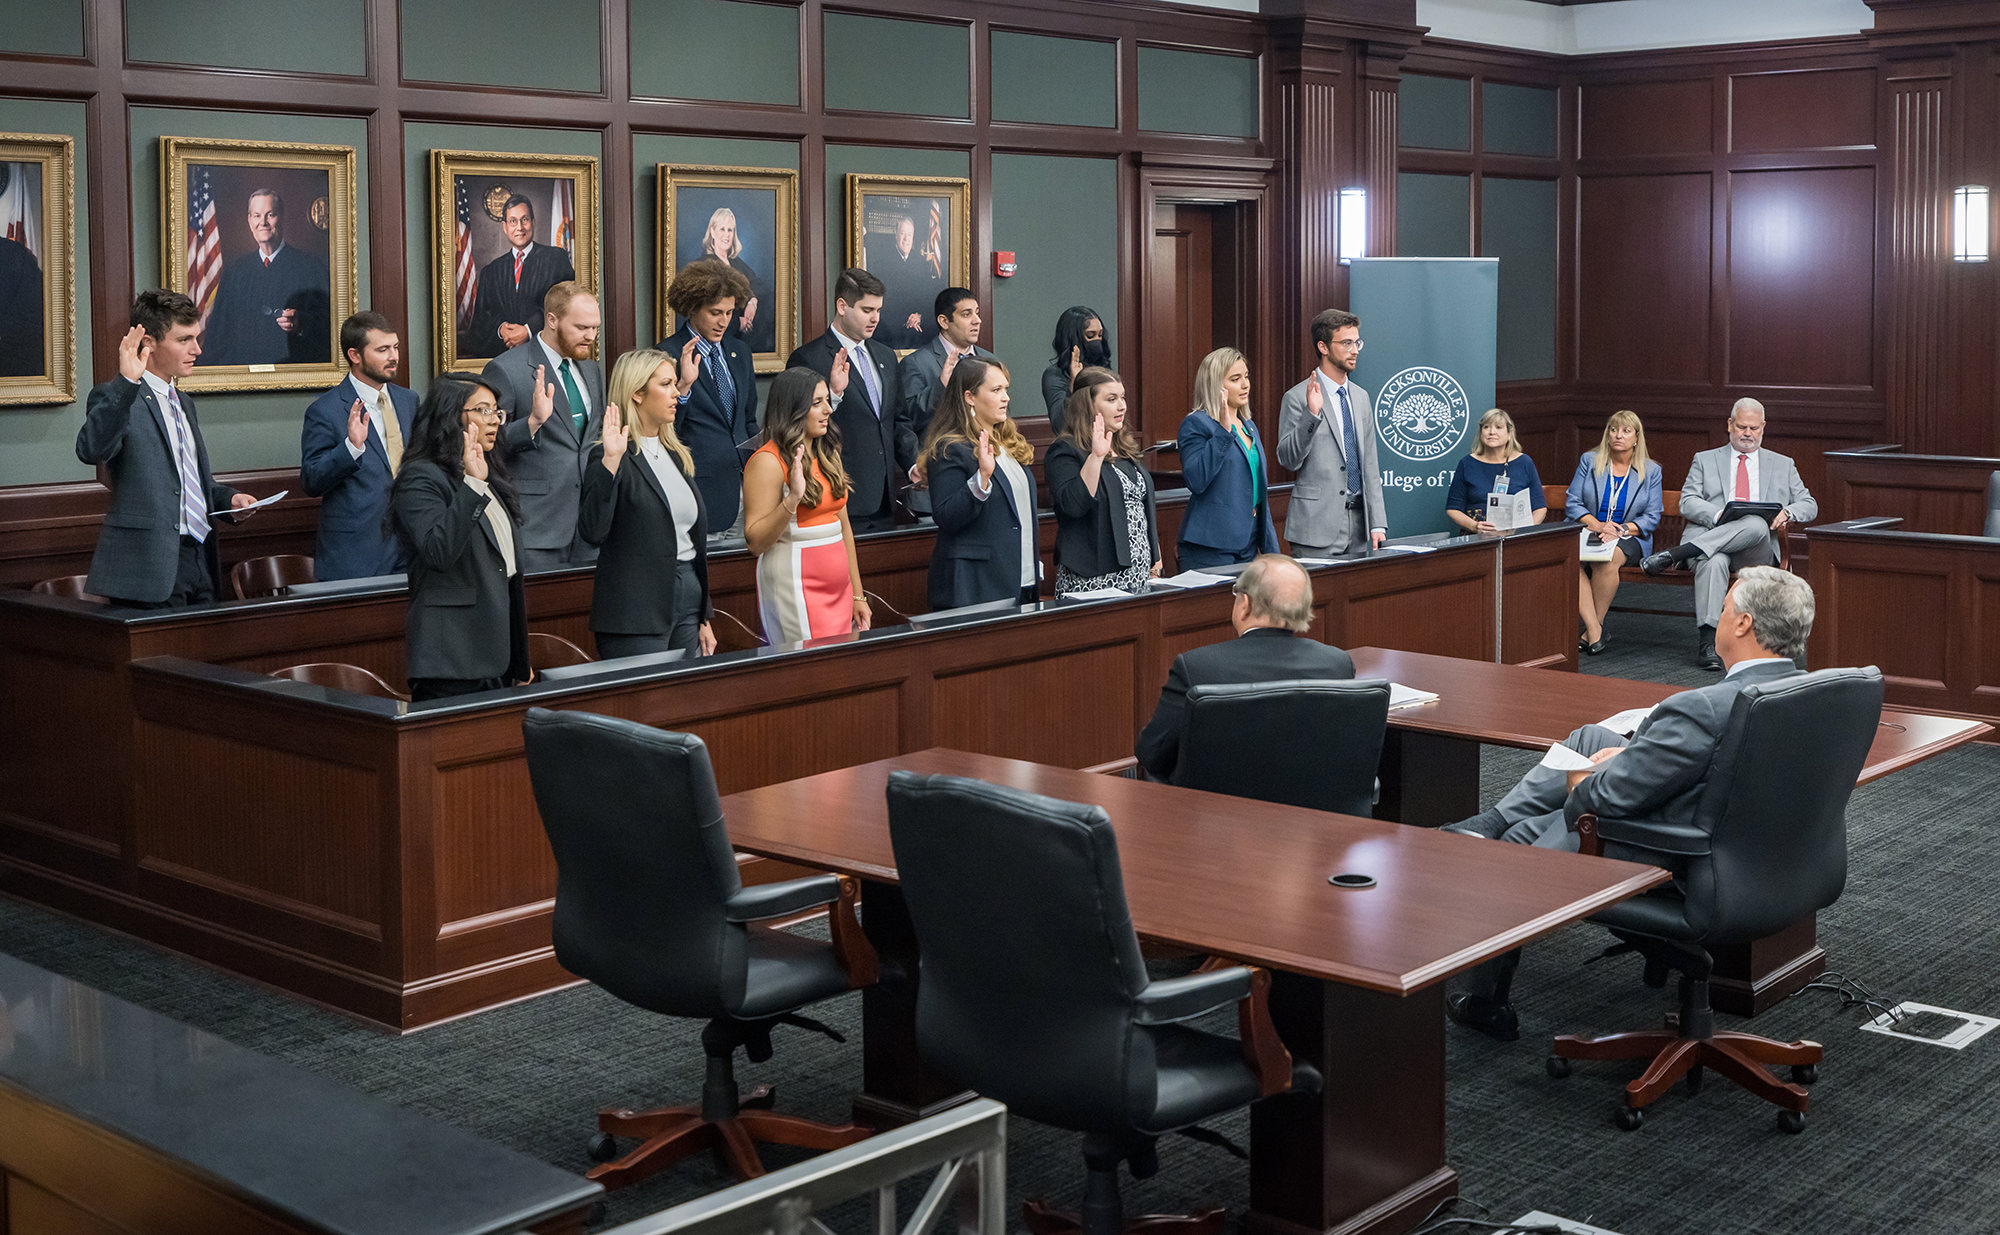 The JU College of Law's class of 2025 takes an oath at the college’s formal convocation Aug. 5 at the Duval County Courthouse.